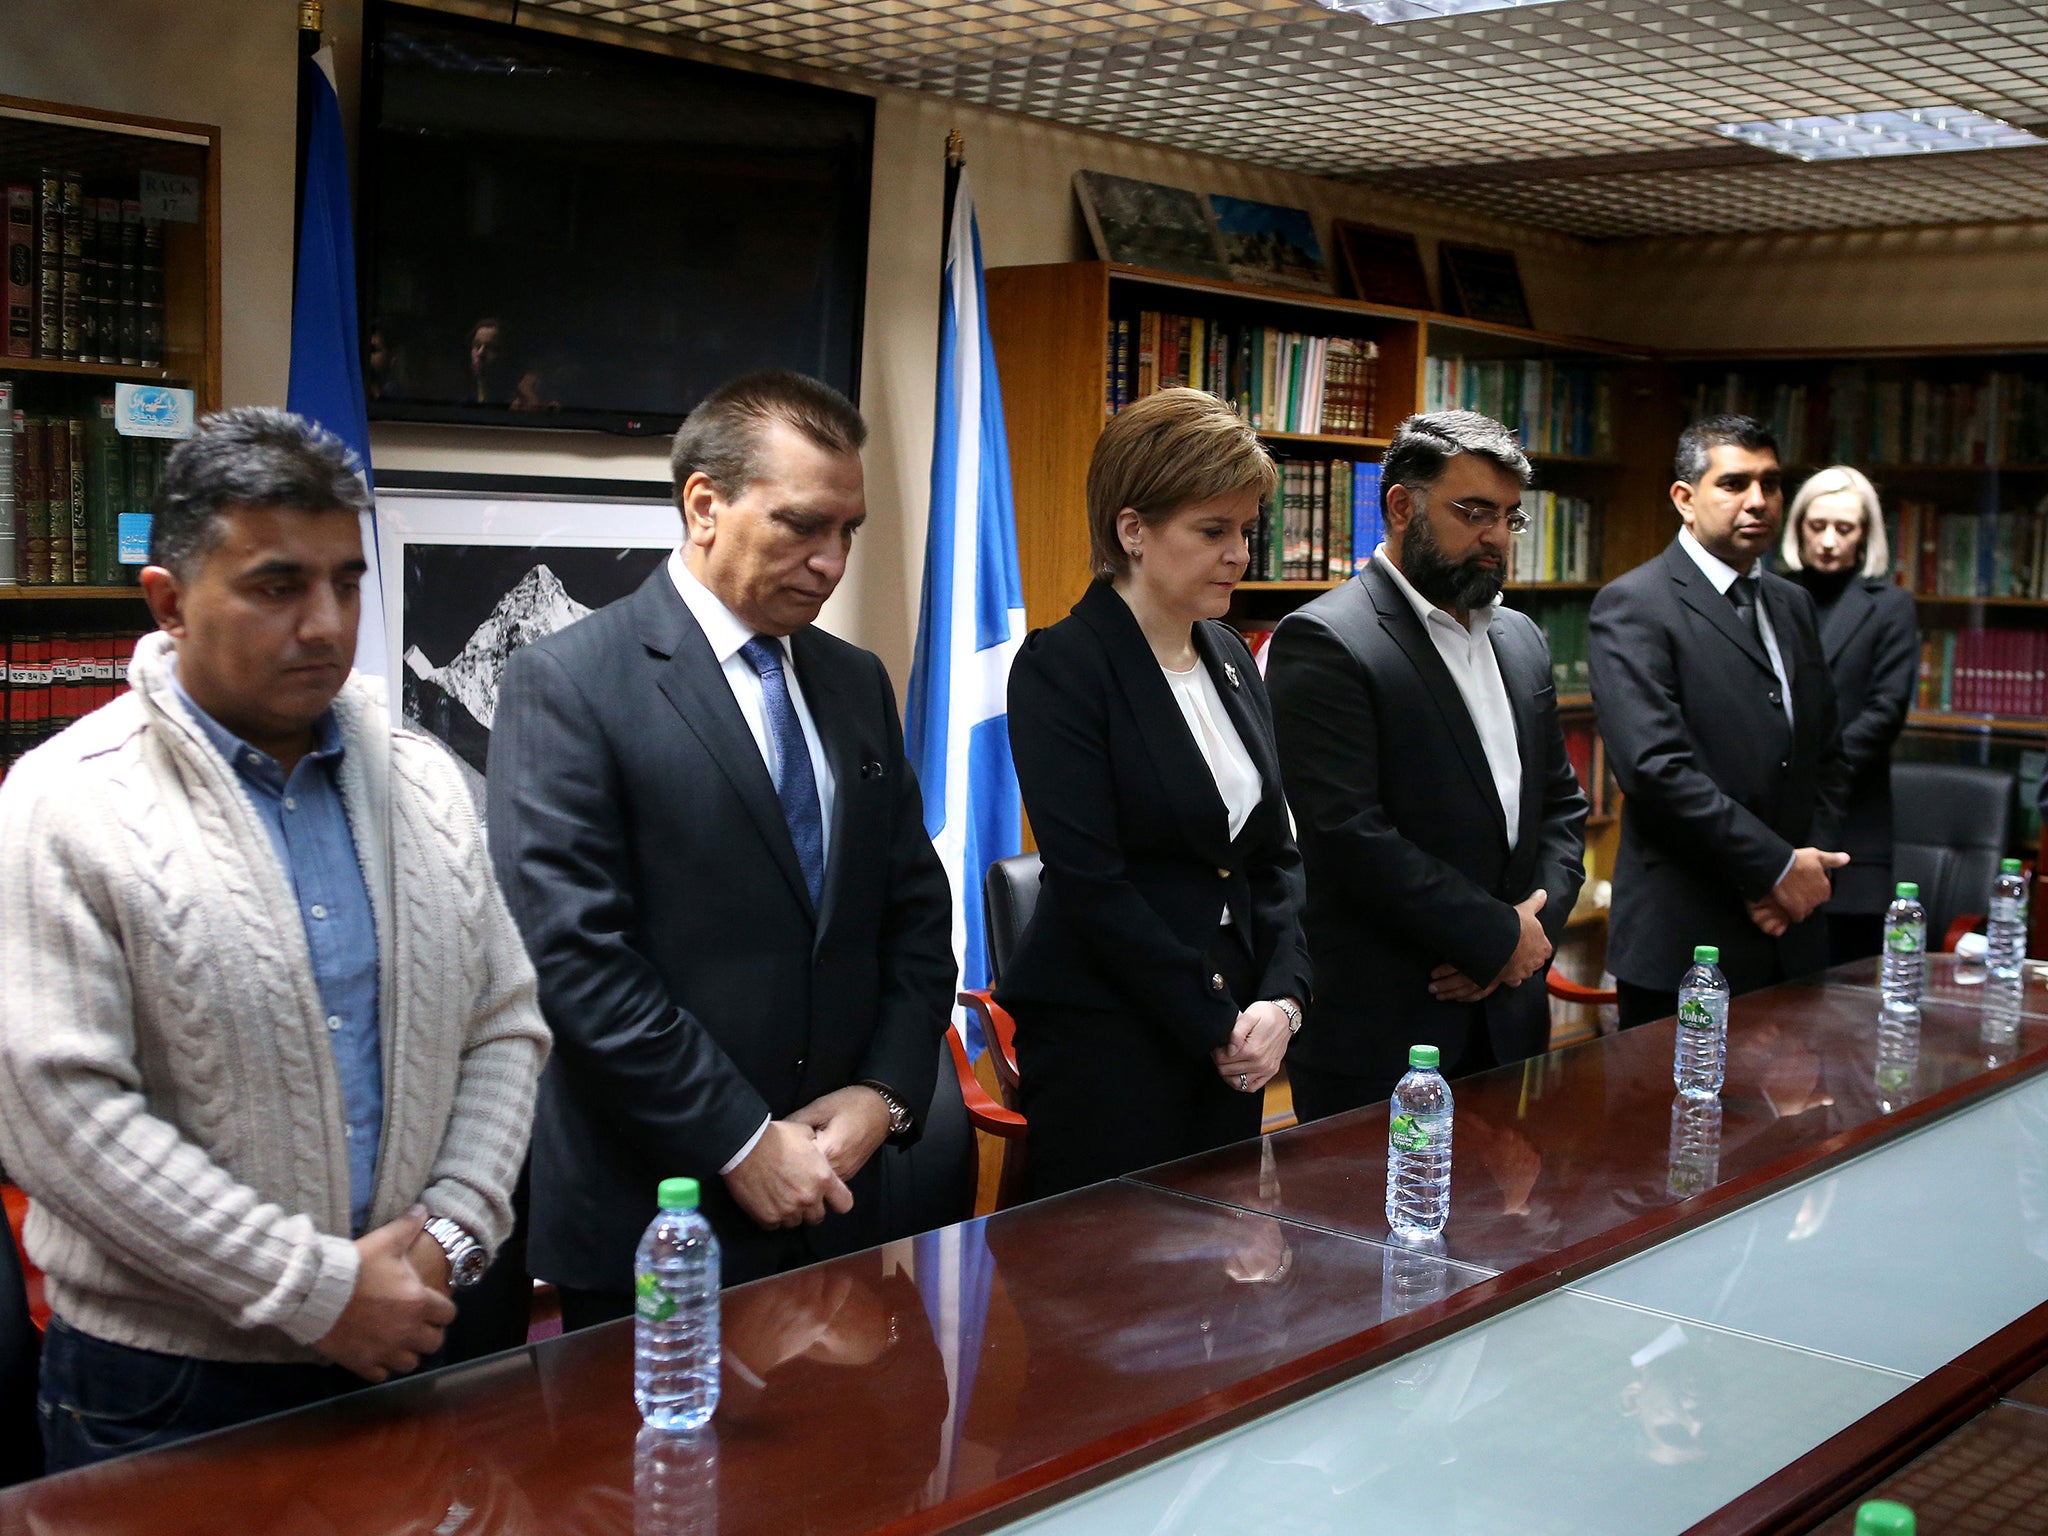 Mosque President Maqbool Rasul (second left) with Scotland First Minister Nicola Sturgeon and Mosque Secretary Nabeel Sheikh (fourth left) as they observe a minute's silence across Europe to mark the victims of attacks in Paris